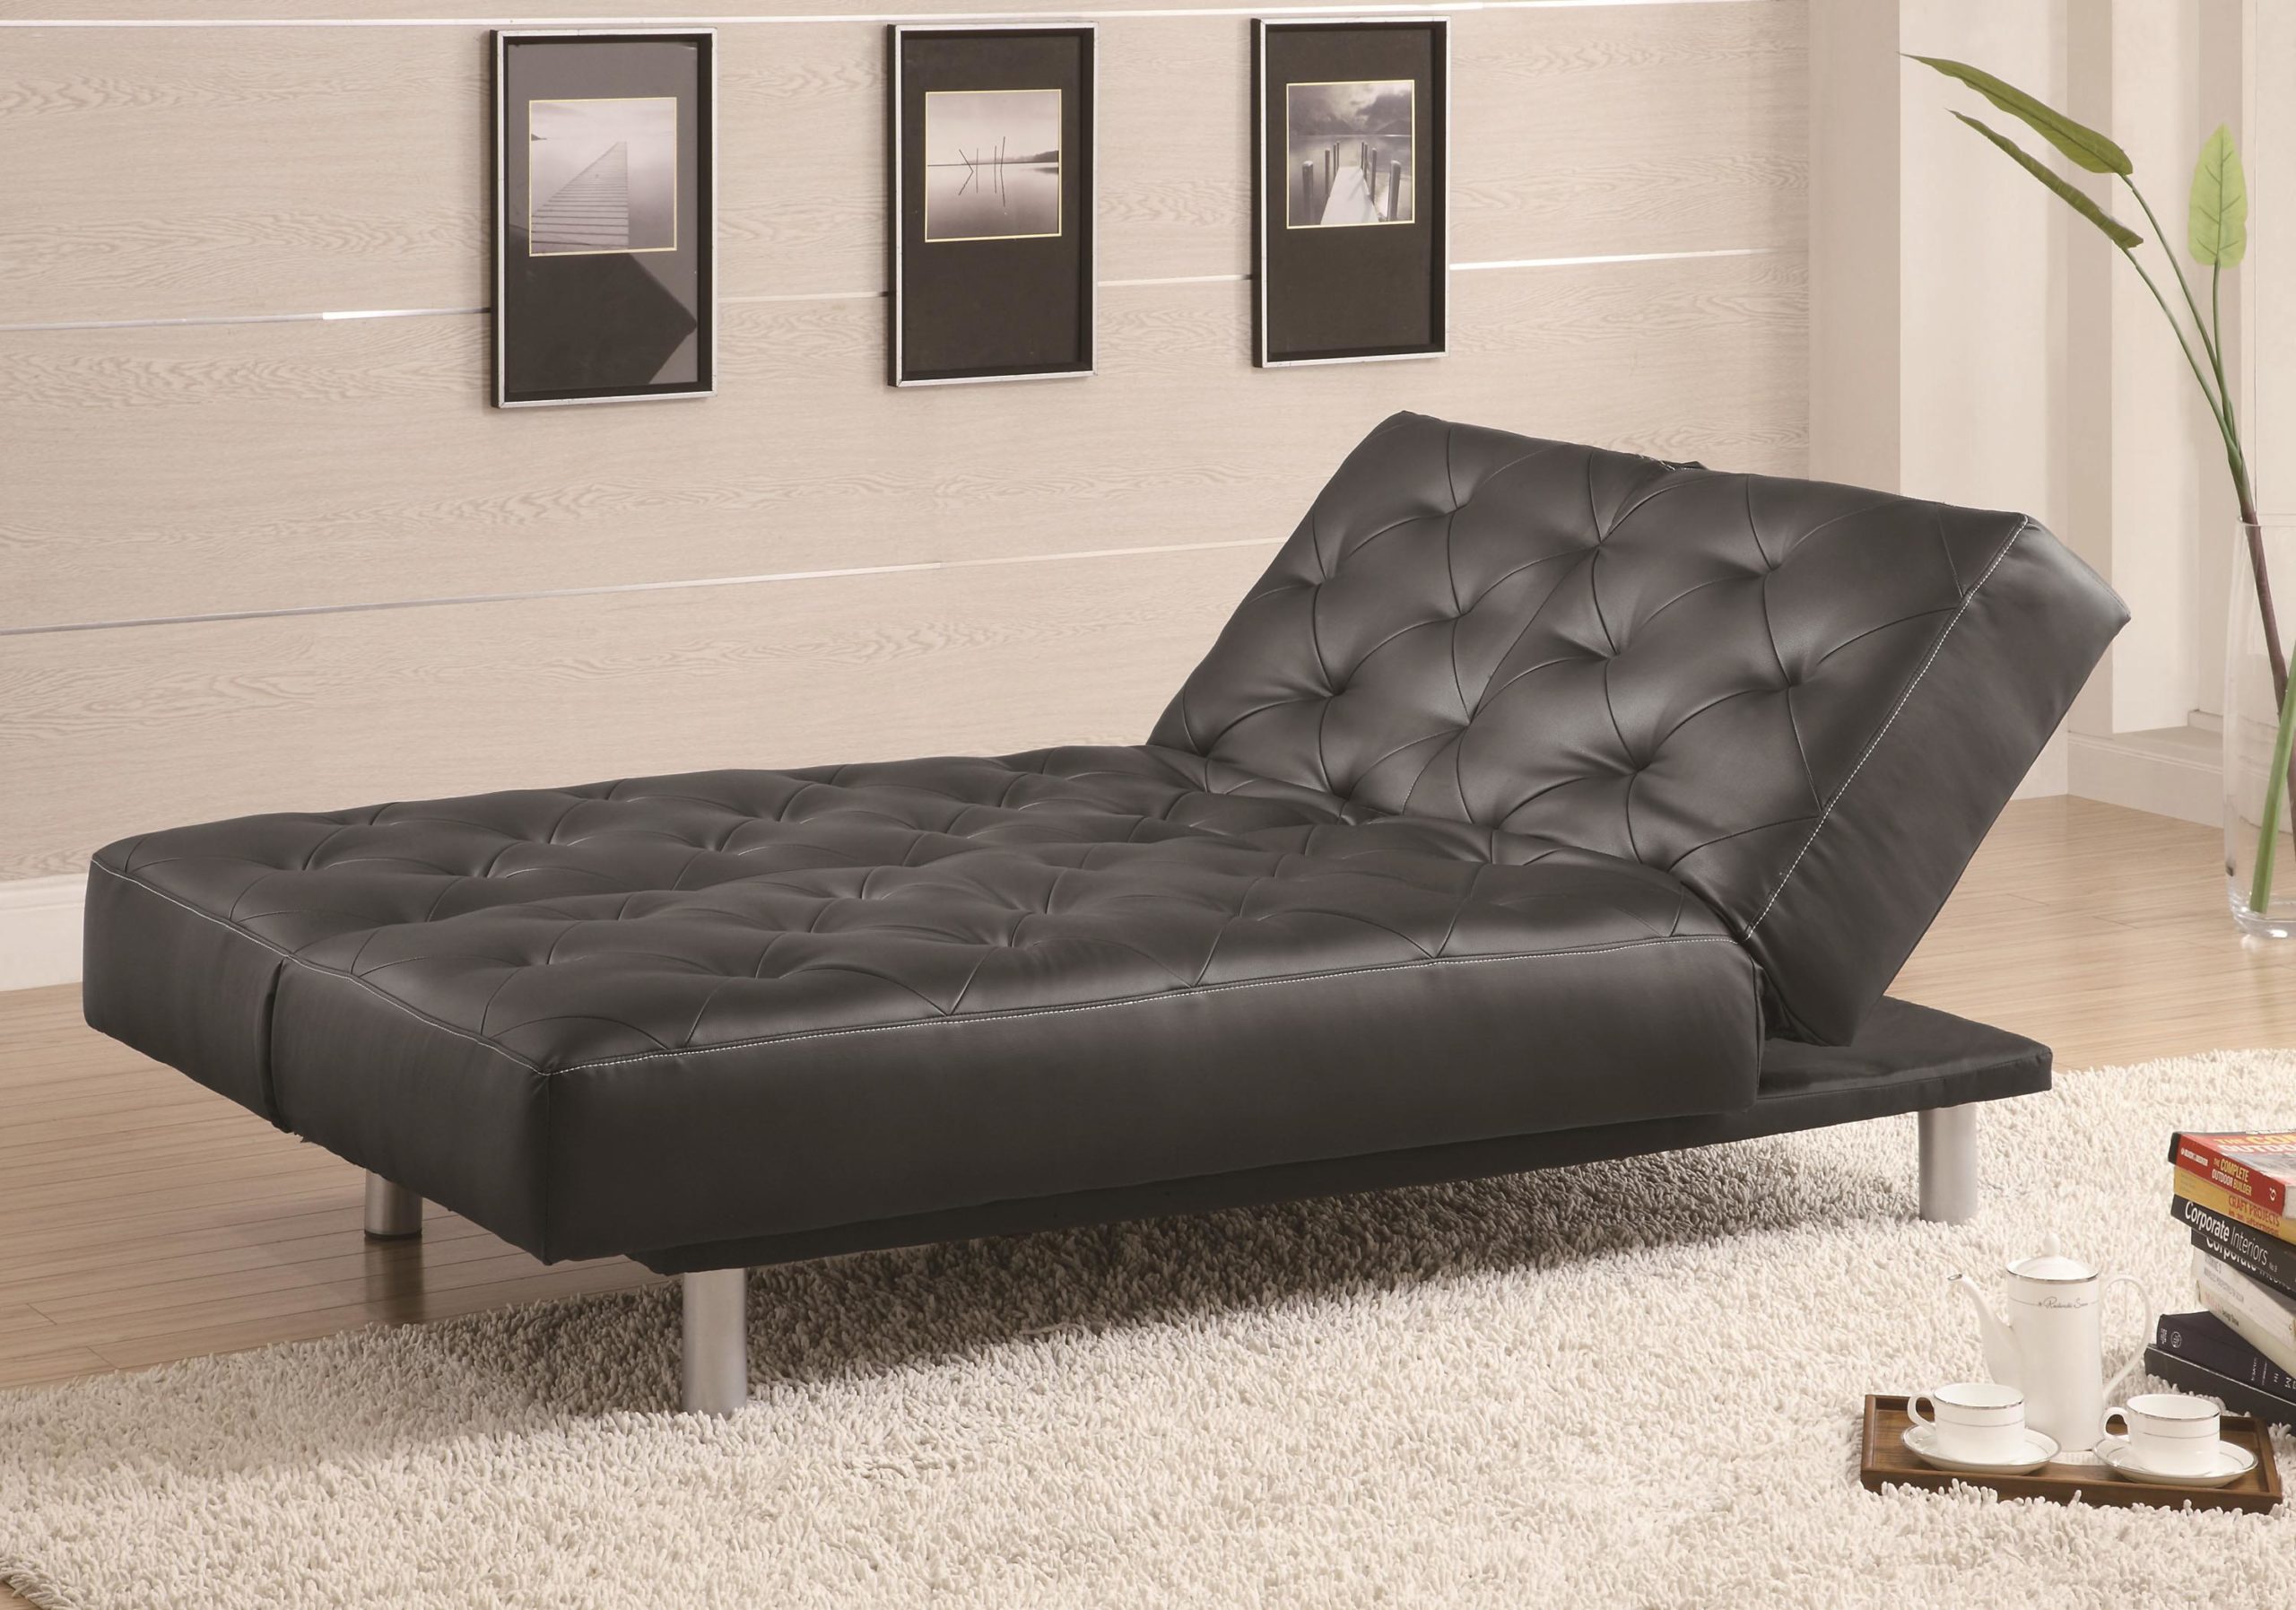 Brown Vinyl Tufted Sofa Bed in Pillow Up position